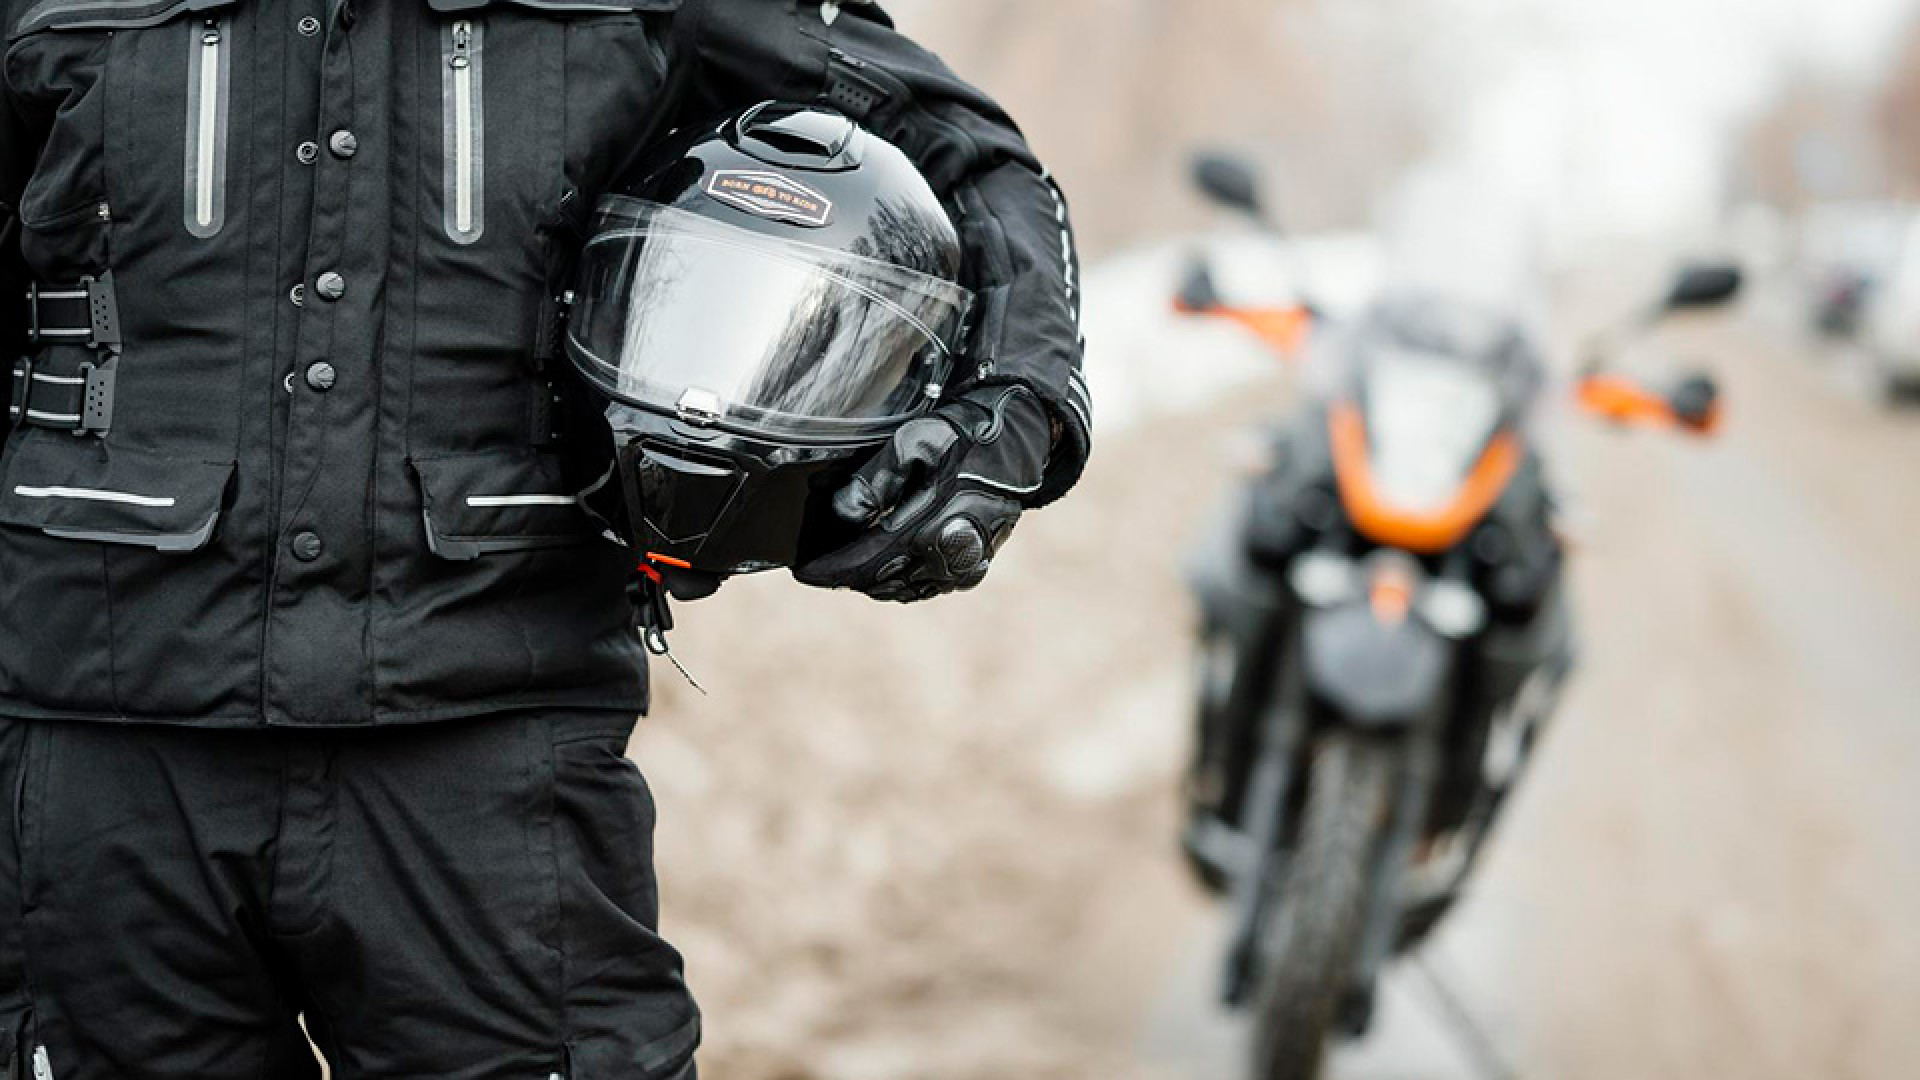 https://www.raceleathers.co.uk/image/cache/catalog/Blog%20Images/What%20Motorcycle%20Jacket%20to%20Wear%20in%20Summer-1920x1080.jpg